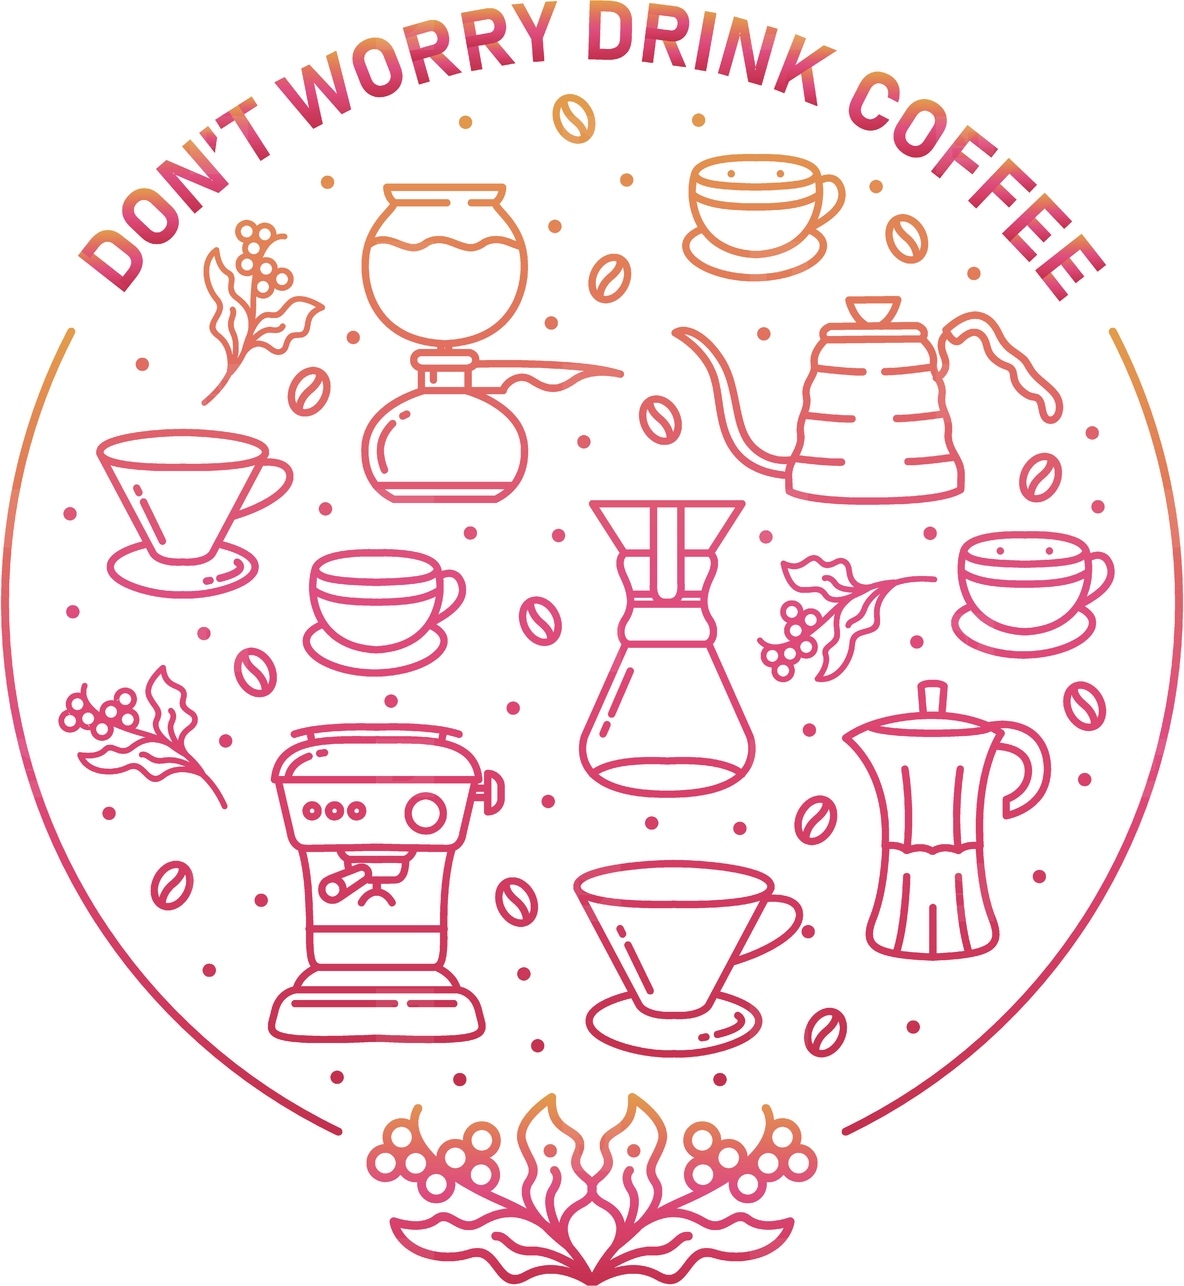 Do not Worry Drink Coffee